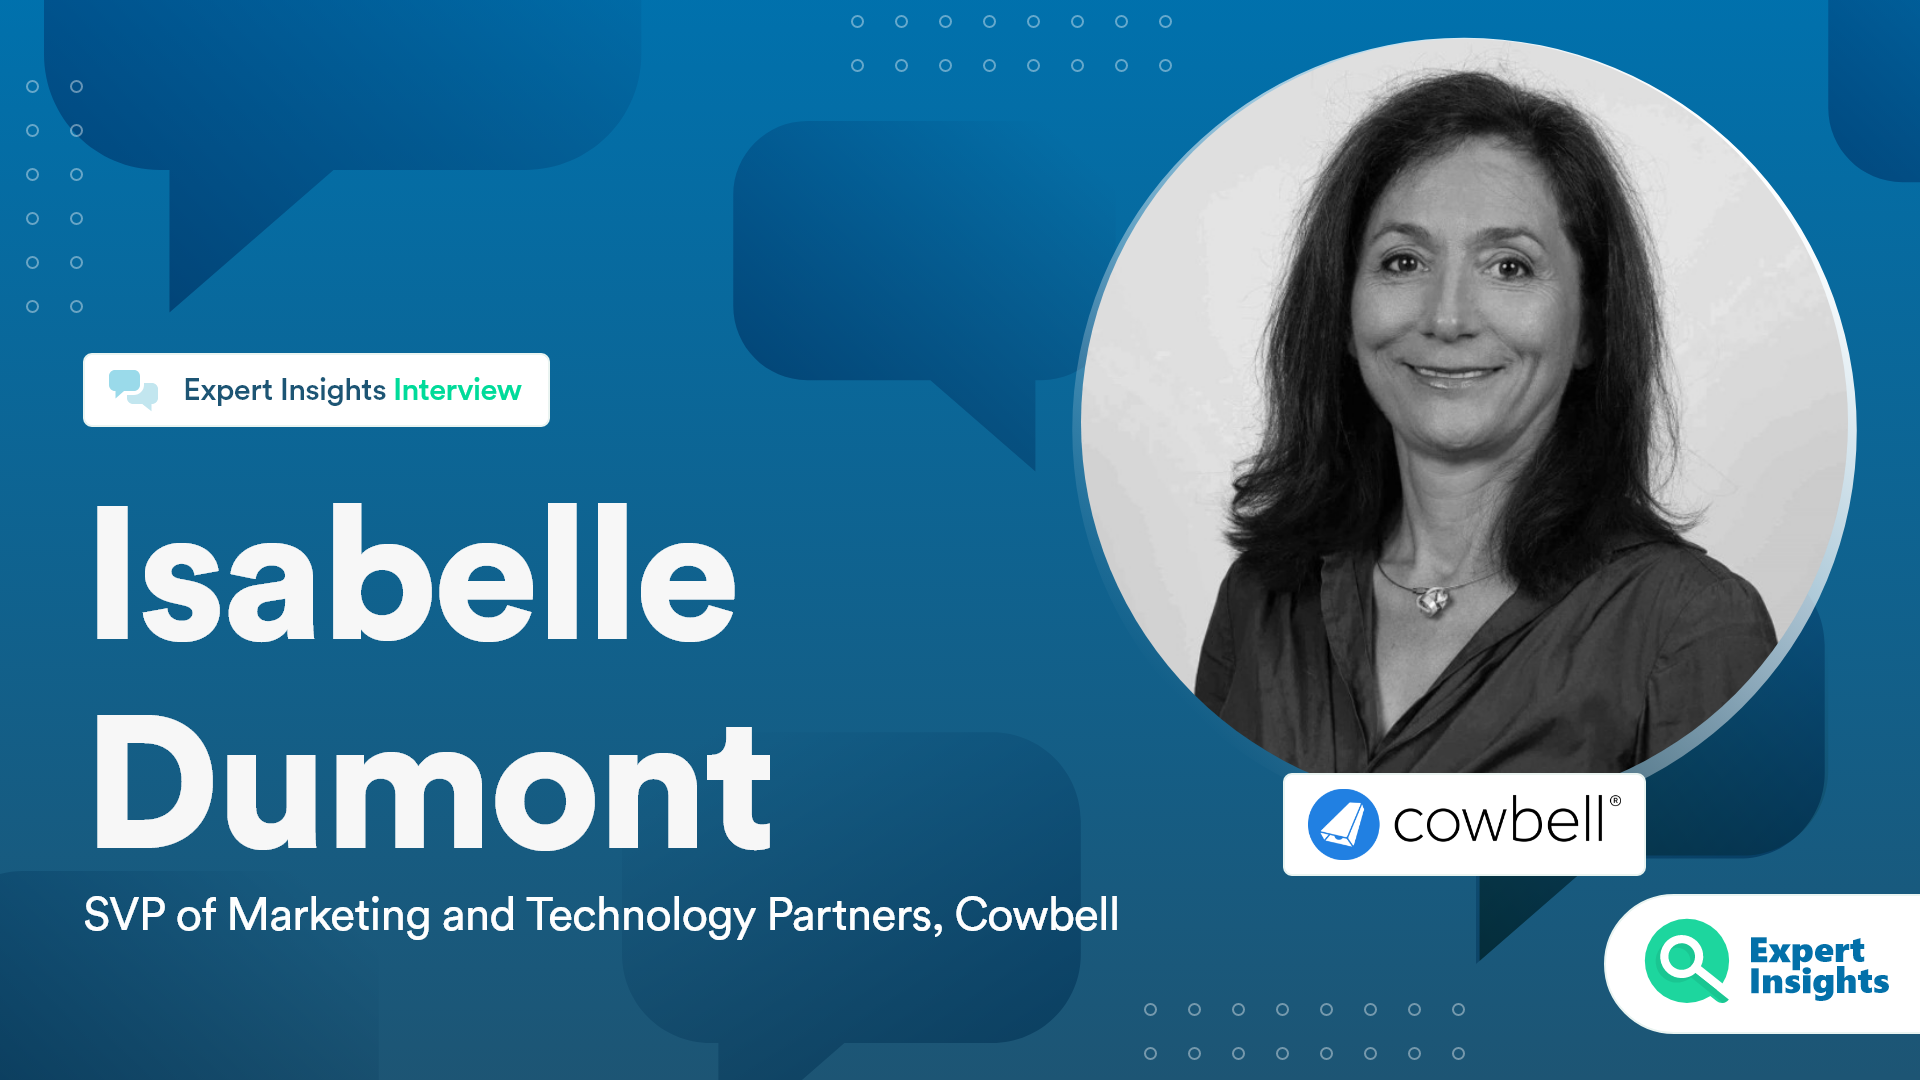 Expert Insights Interview With Isabelle Dumont Of Cowbell